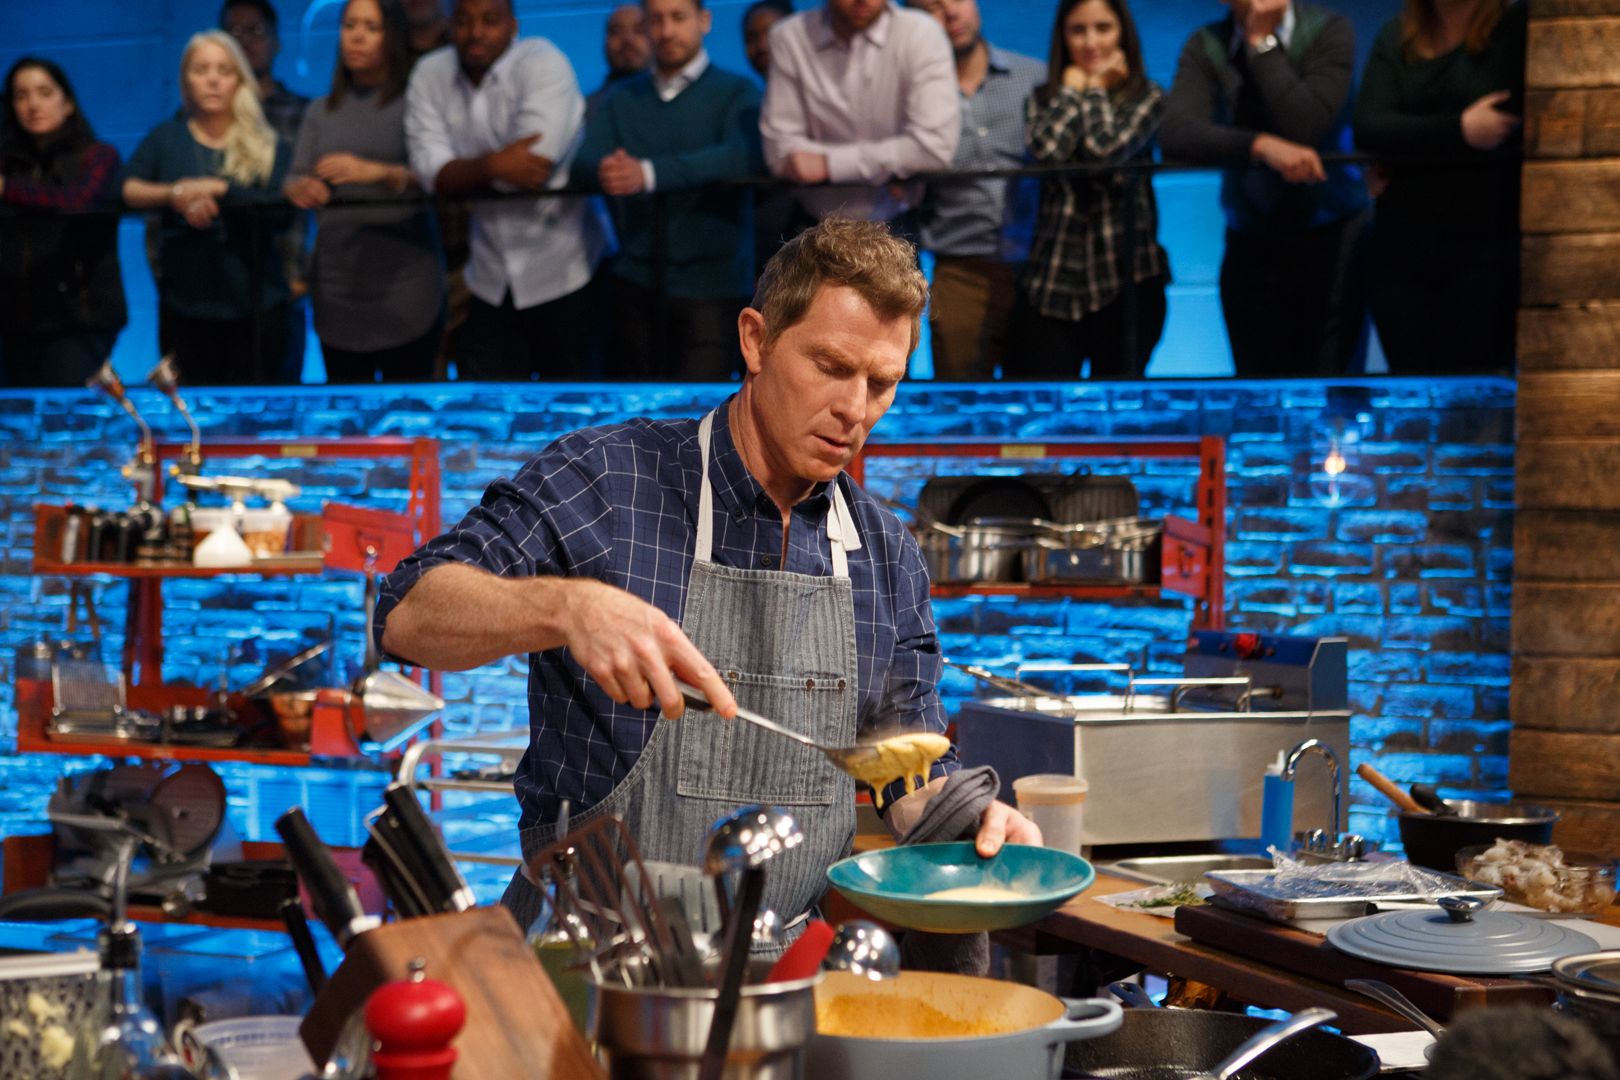 New Bobby Flay Cookbook: Bobby At Home + Giveaway